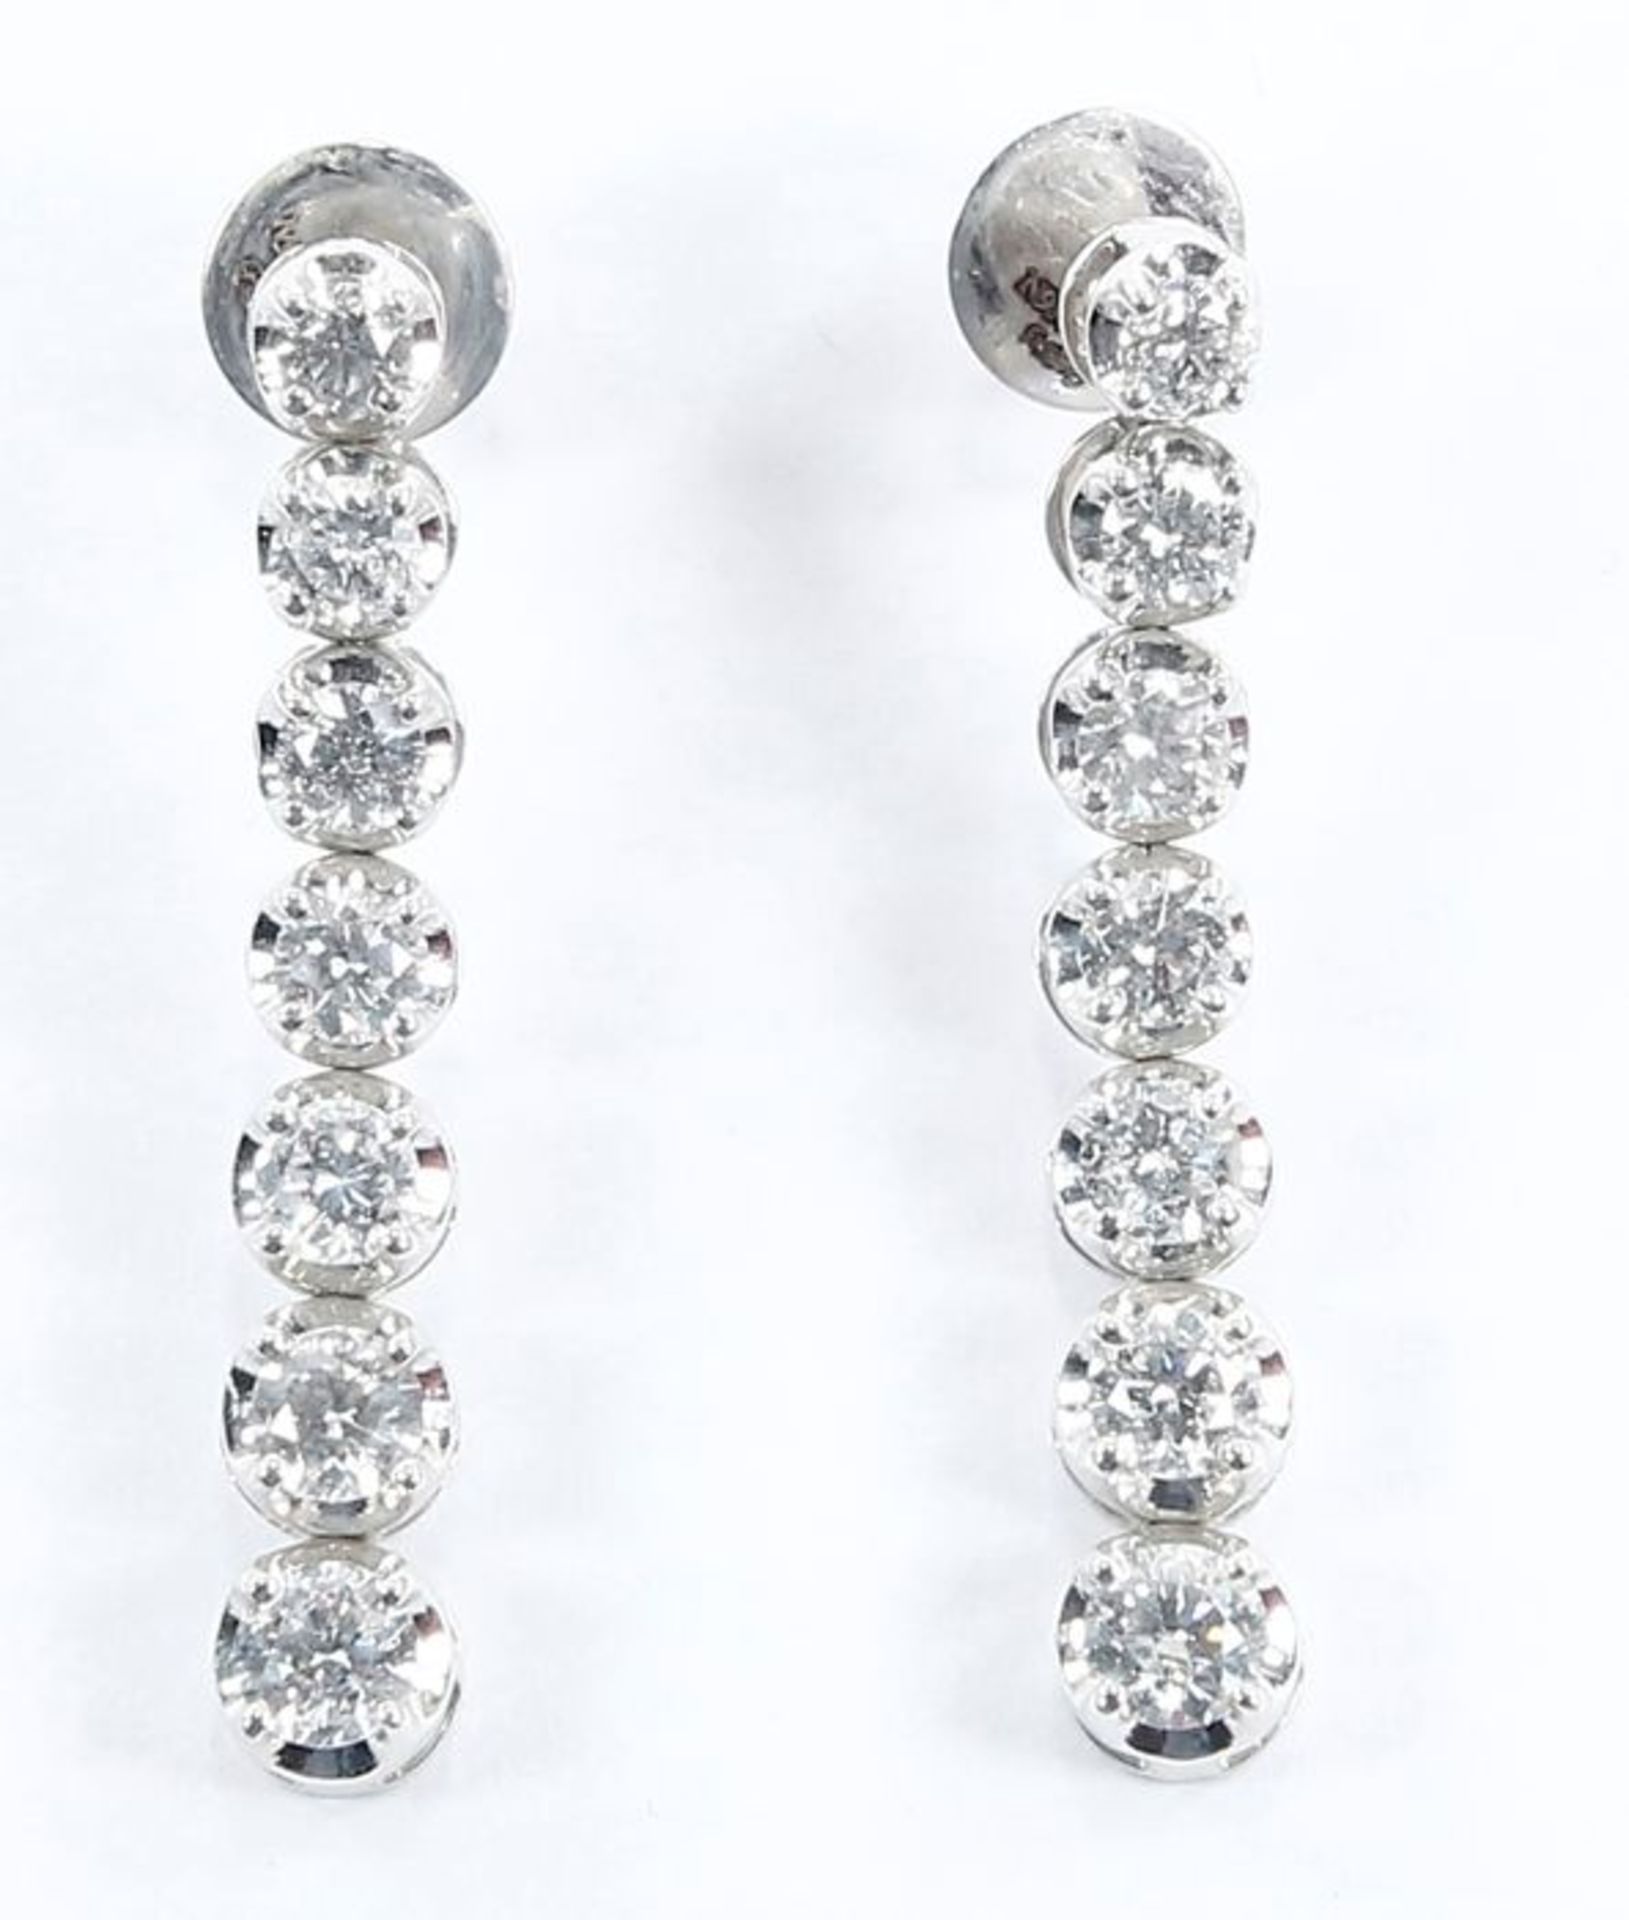 14 K White Gold Solitaire Diamond Necklace & Earrings